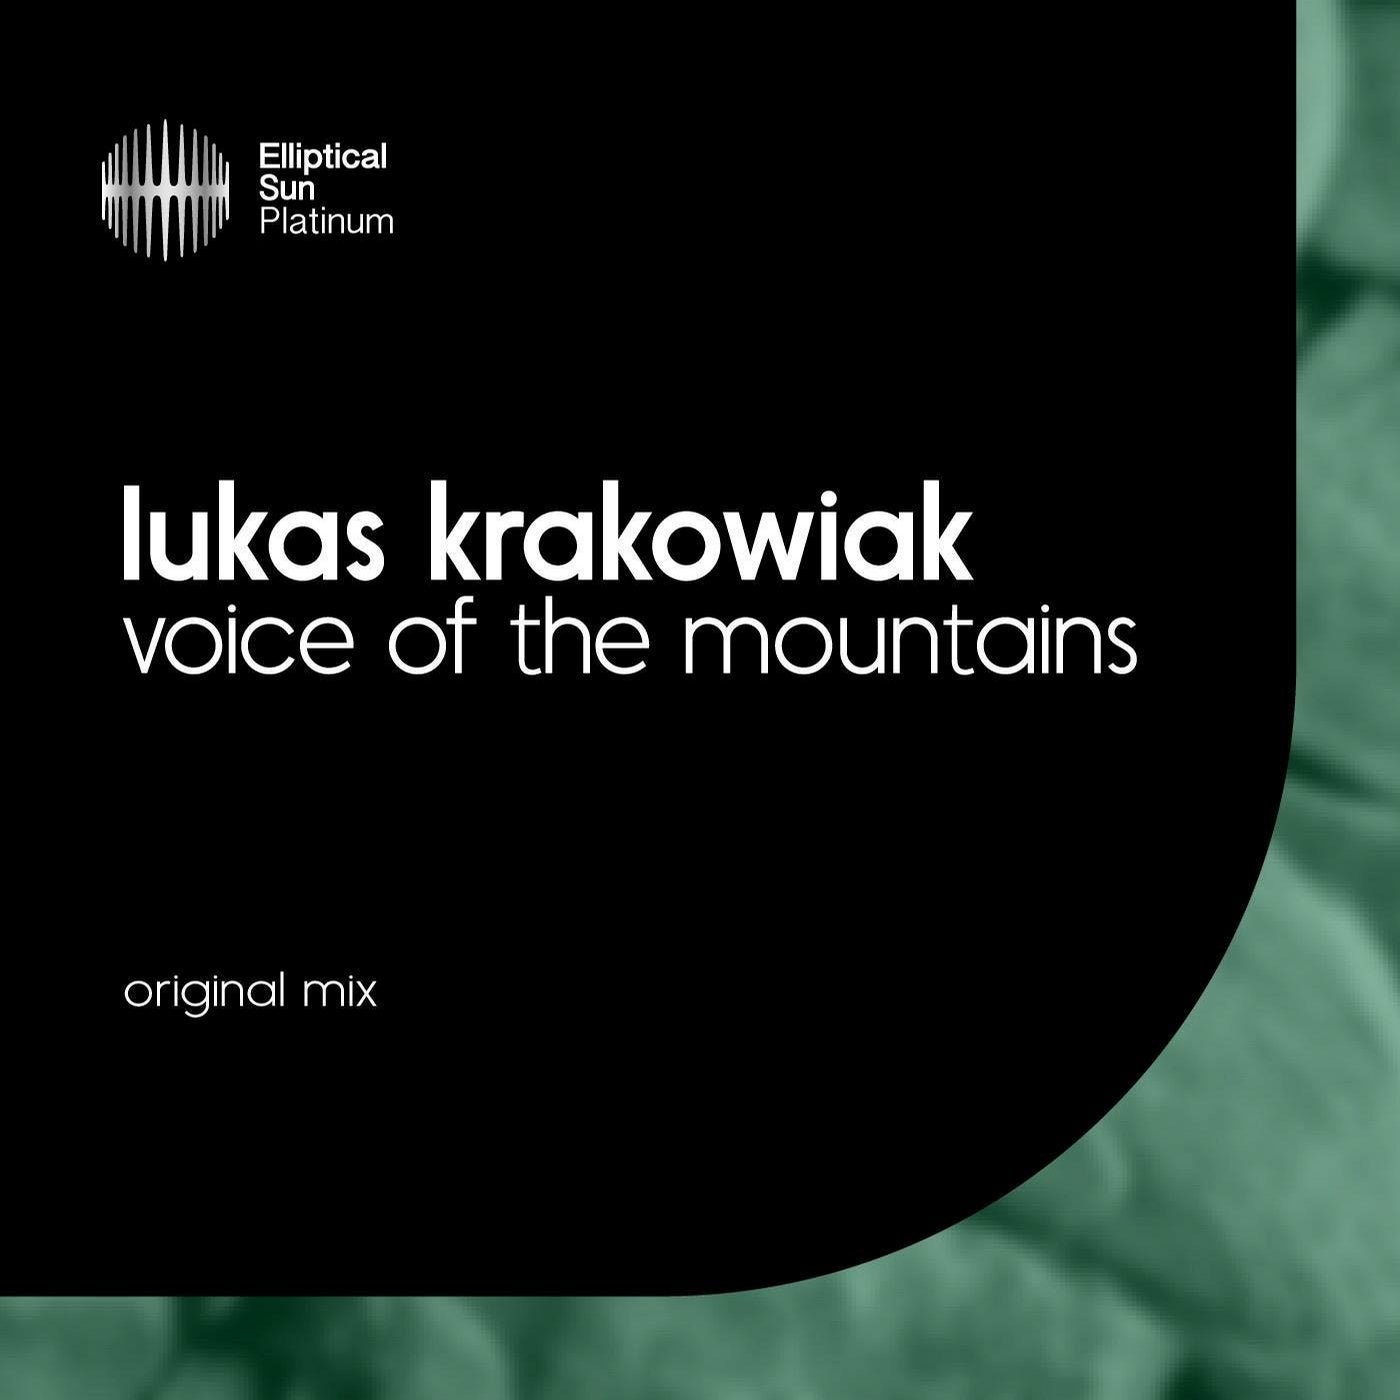 Voice of the Mountains